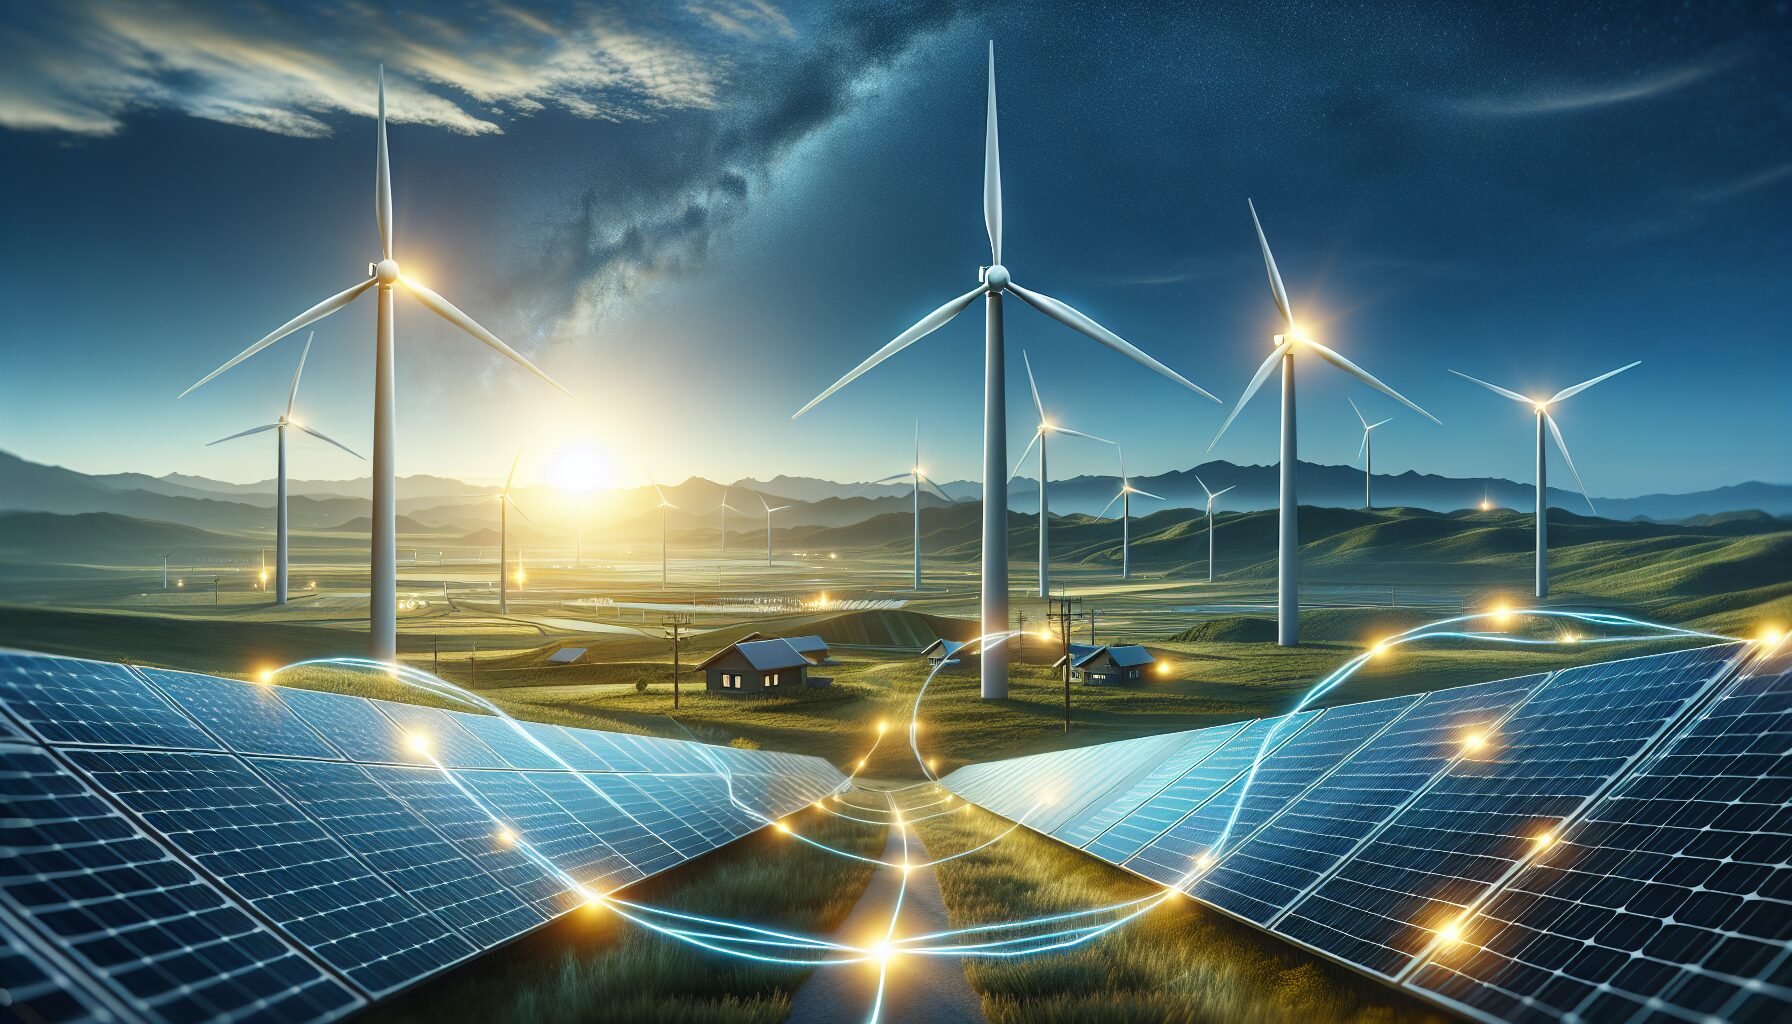 Solar panels and wind turbines in a hybrid power solutions